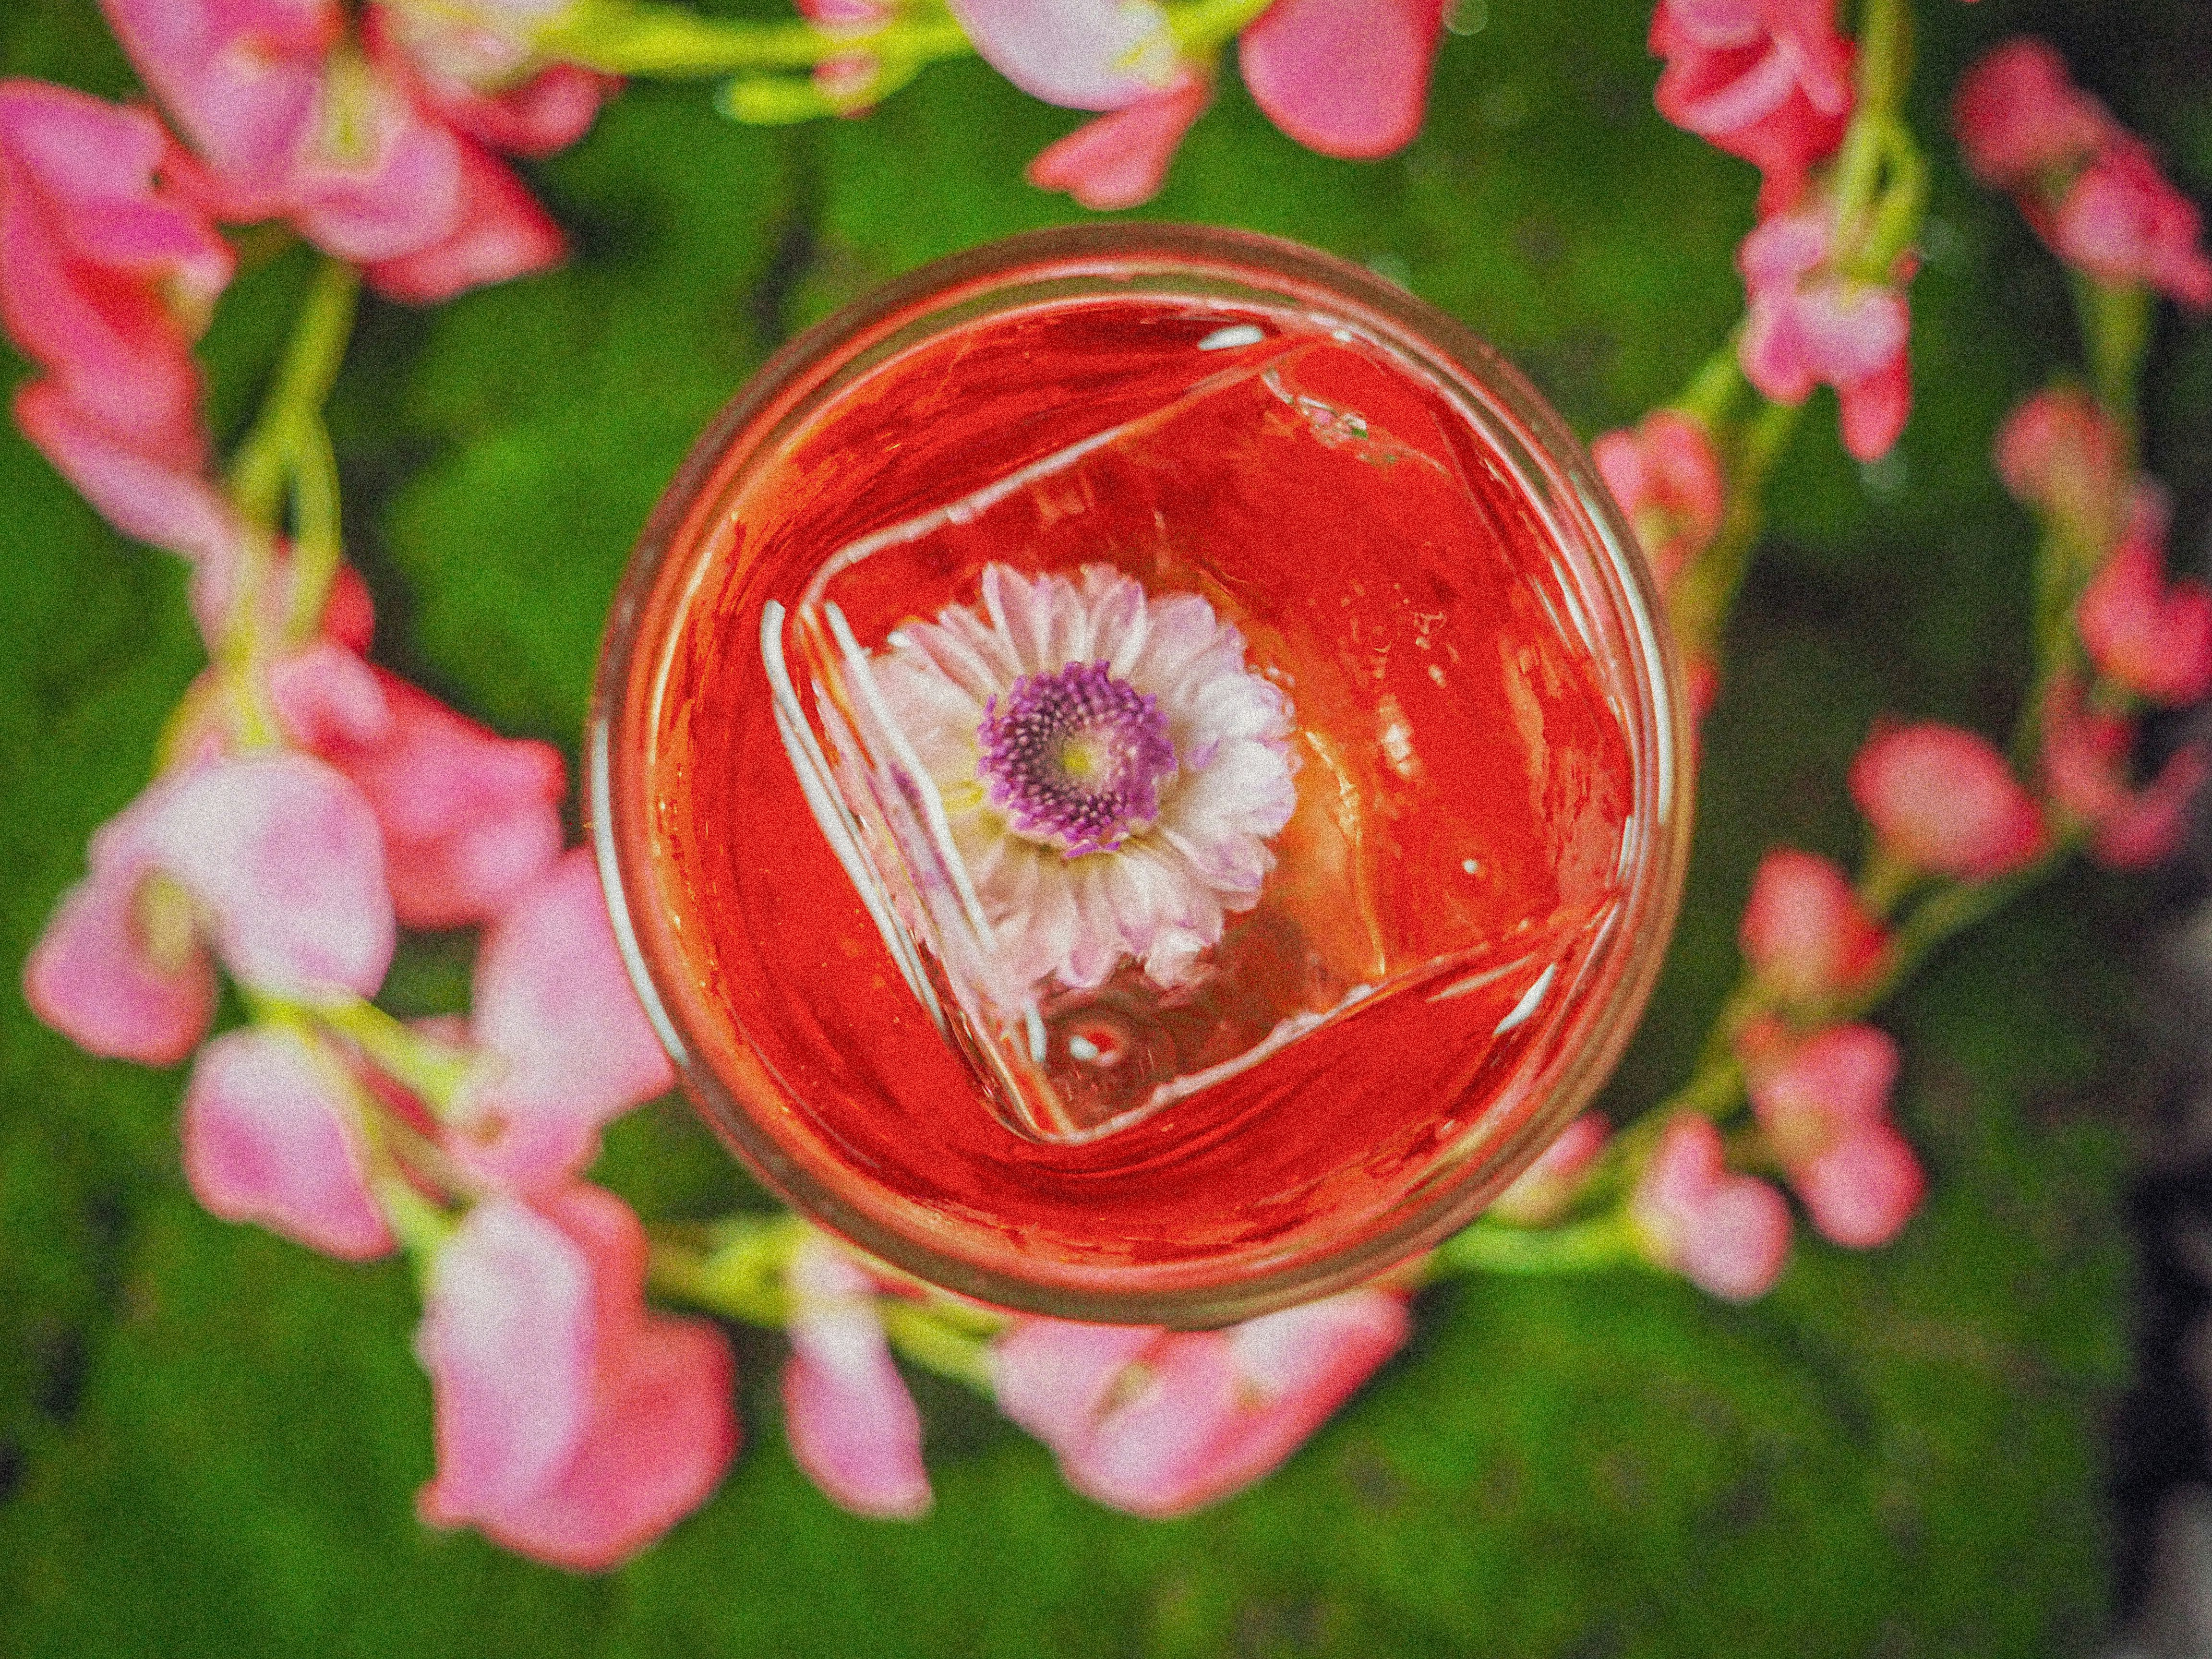 A pretty pink cocktail with a flower-embedded ice cube, with a flowering vine underneath